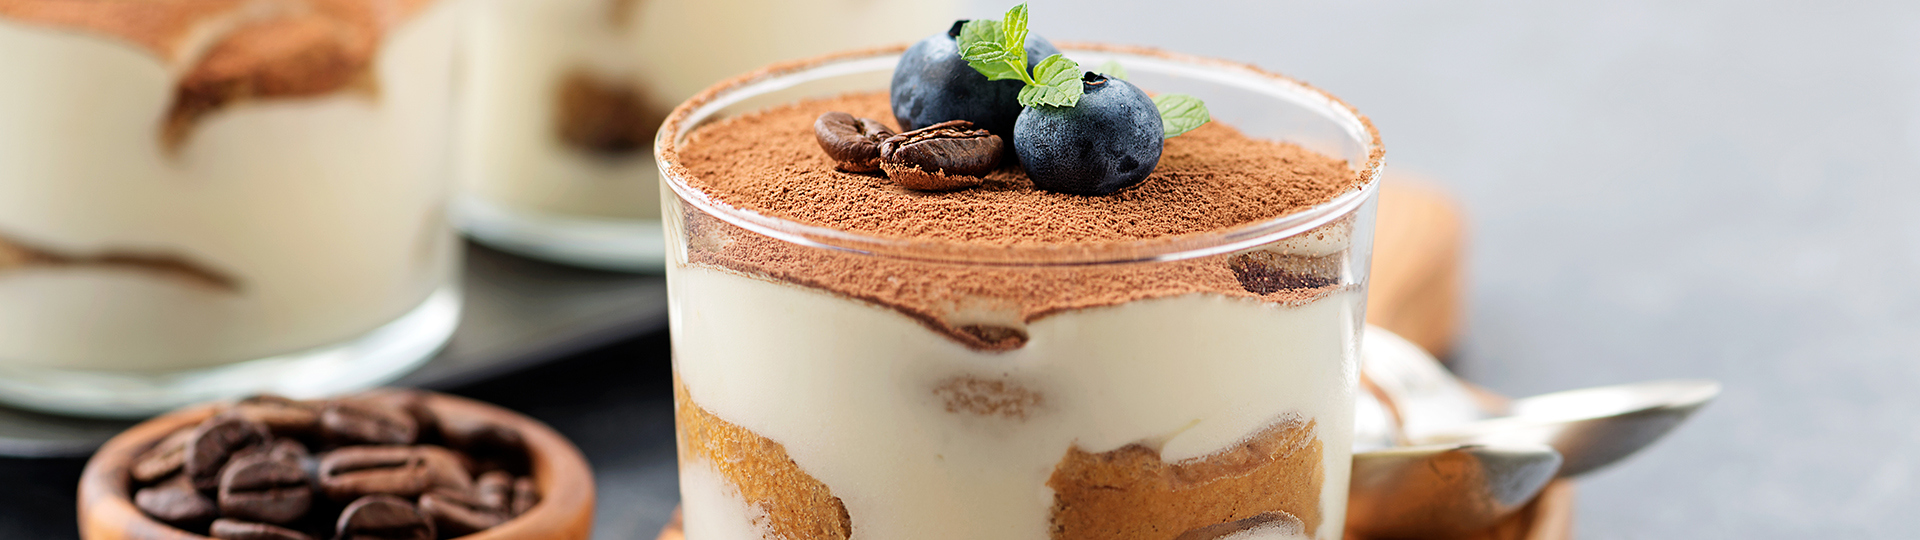 Layered parfait topped with blueberries, coffee beans and mint beside a small bowl of coffee beans.